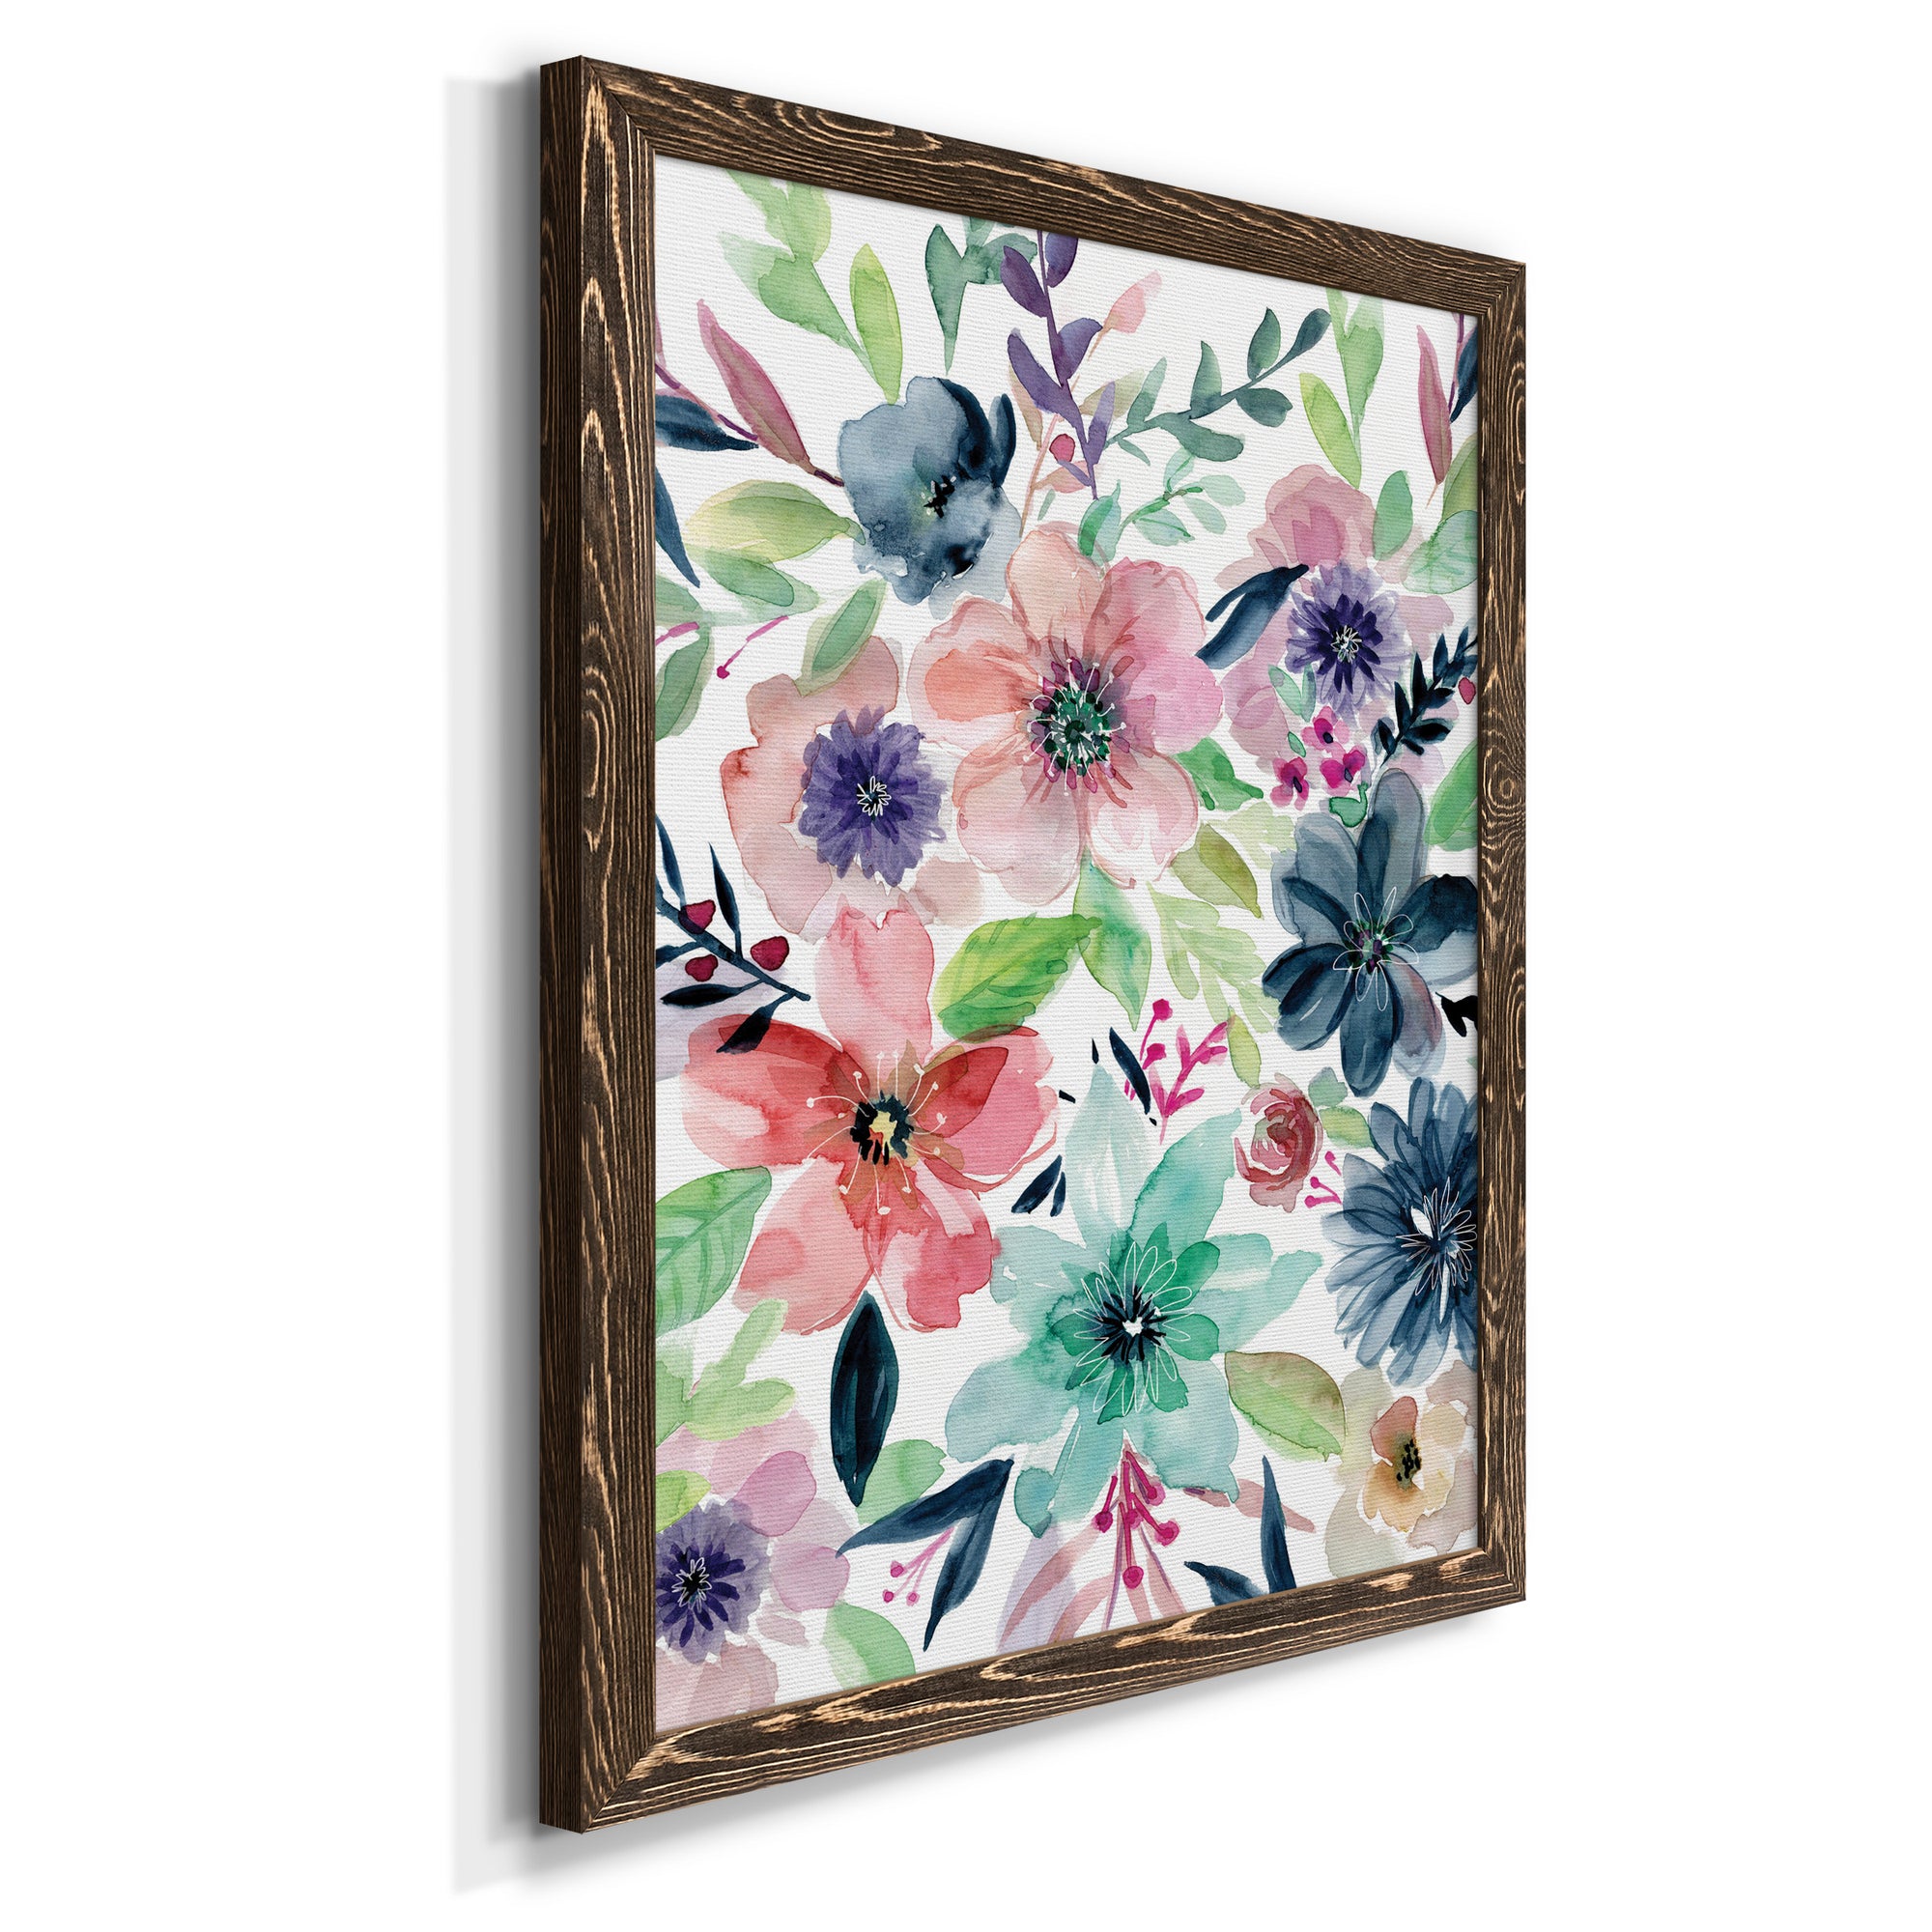 Cool and Serene - Premium Canvas Framed in Barnwood - Ready to Hang